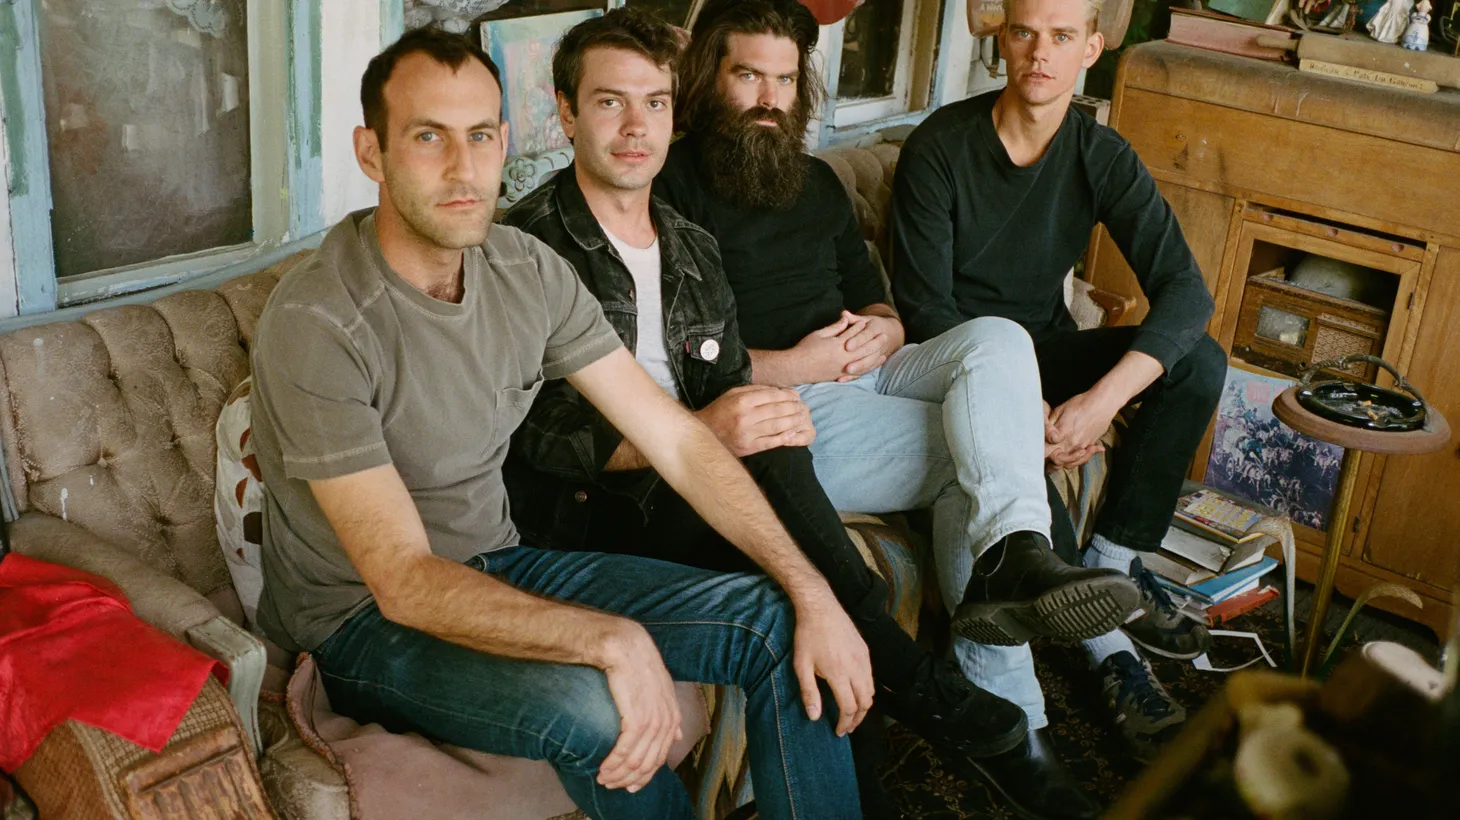 The band now known as Preoccupations (formerly Viet Cong) have released a ferocious rock record as their self-titled debut.